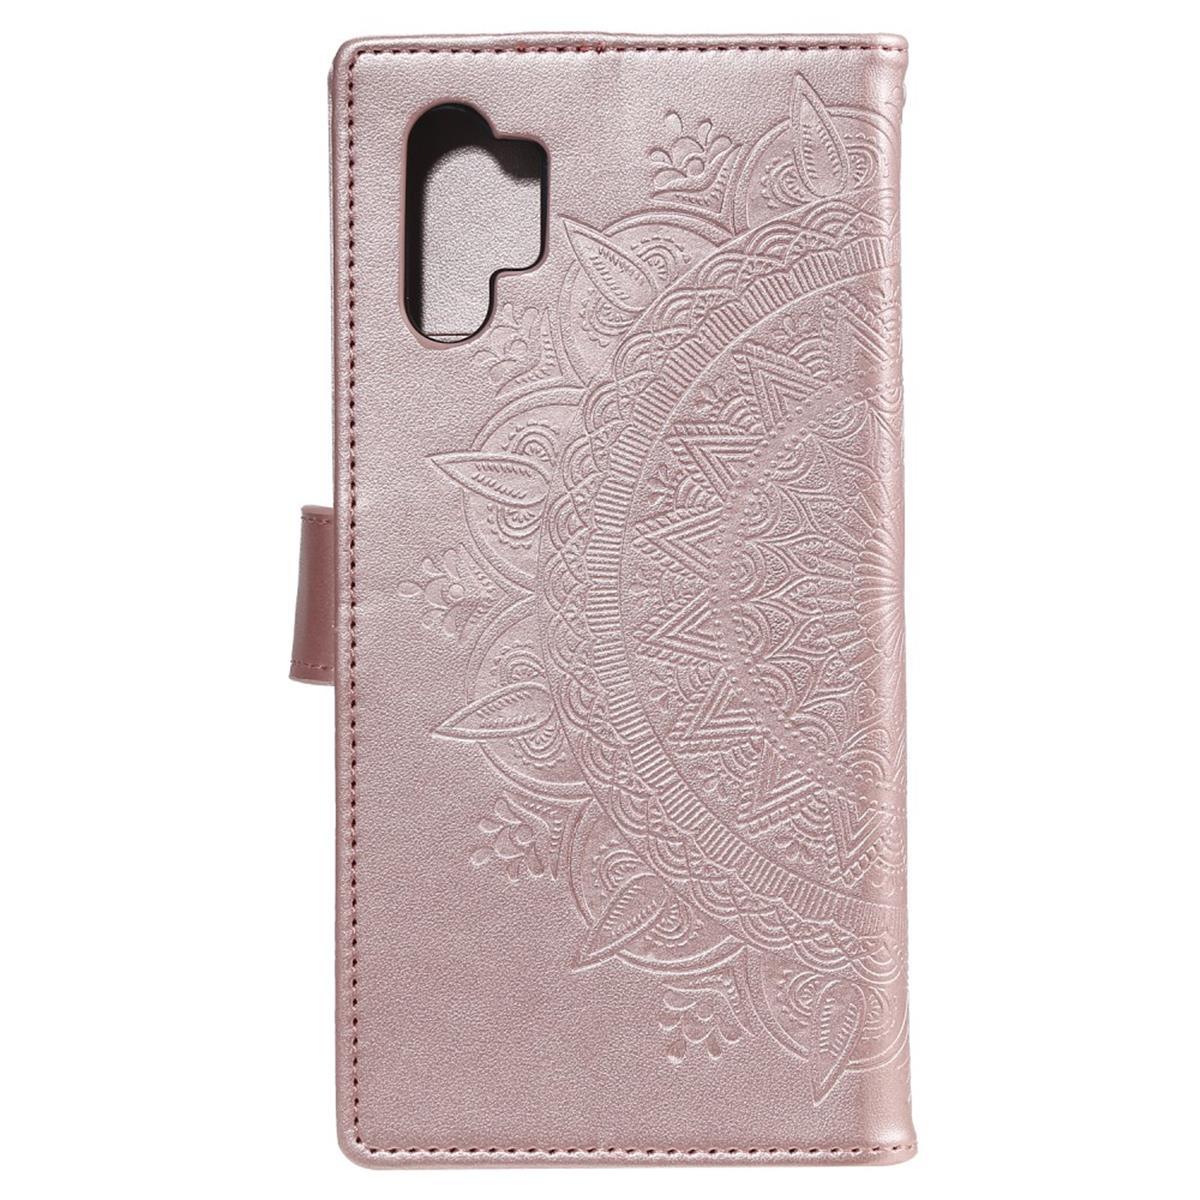 Roségold Mandala Galaxy Bookcover, A32 Klapphülle mit Muster, COVERKINGZ Samsung, 4G,